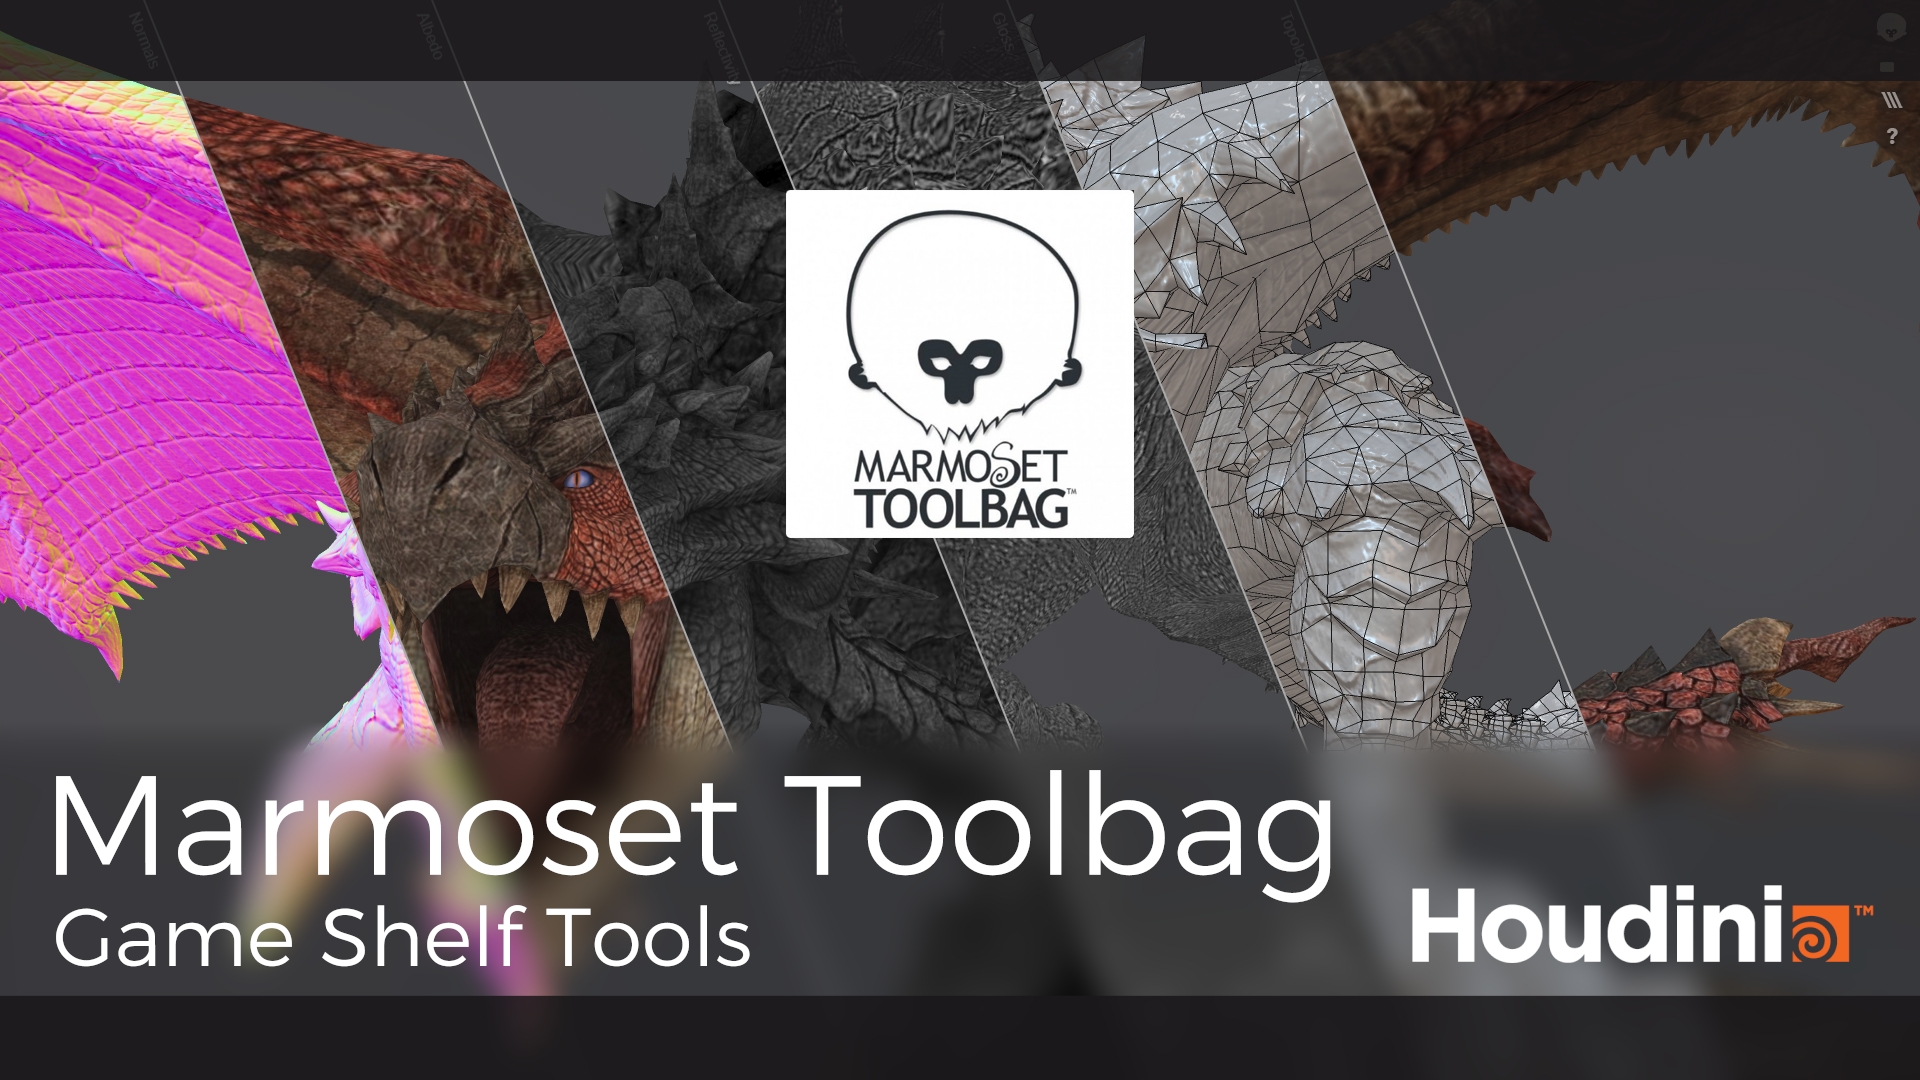 Marmoset Toolbag 4.0.6.3 for ios download free